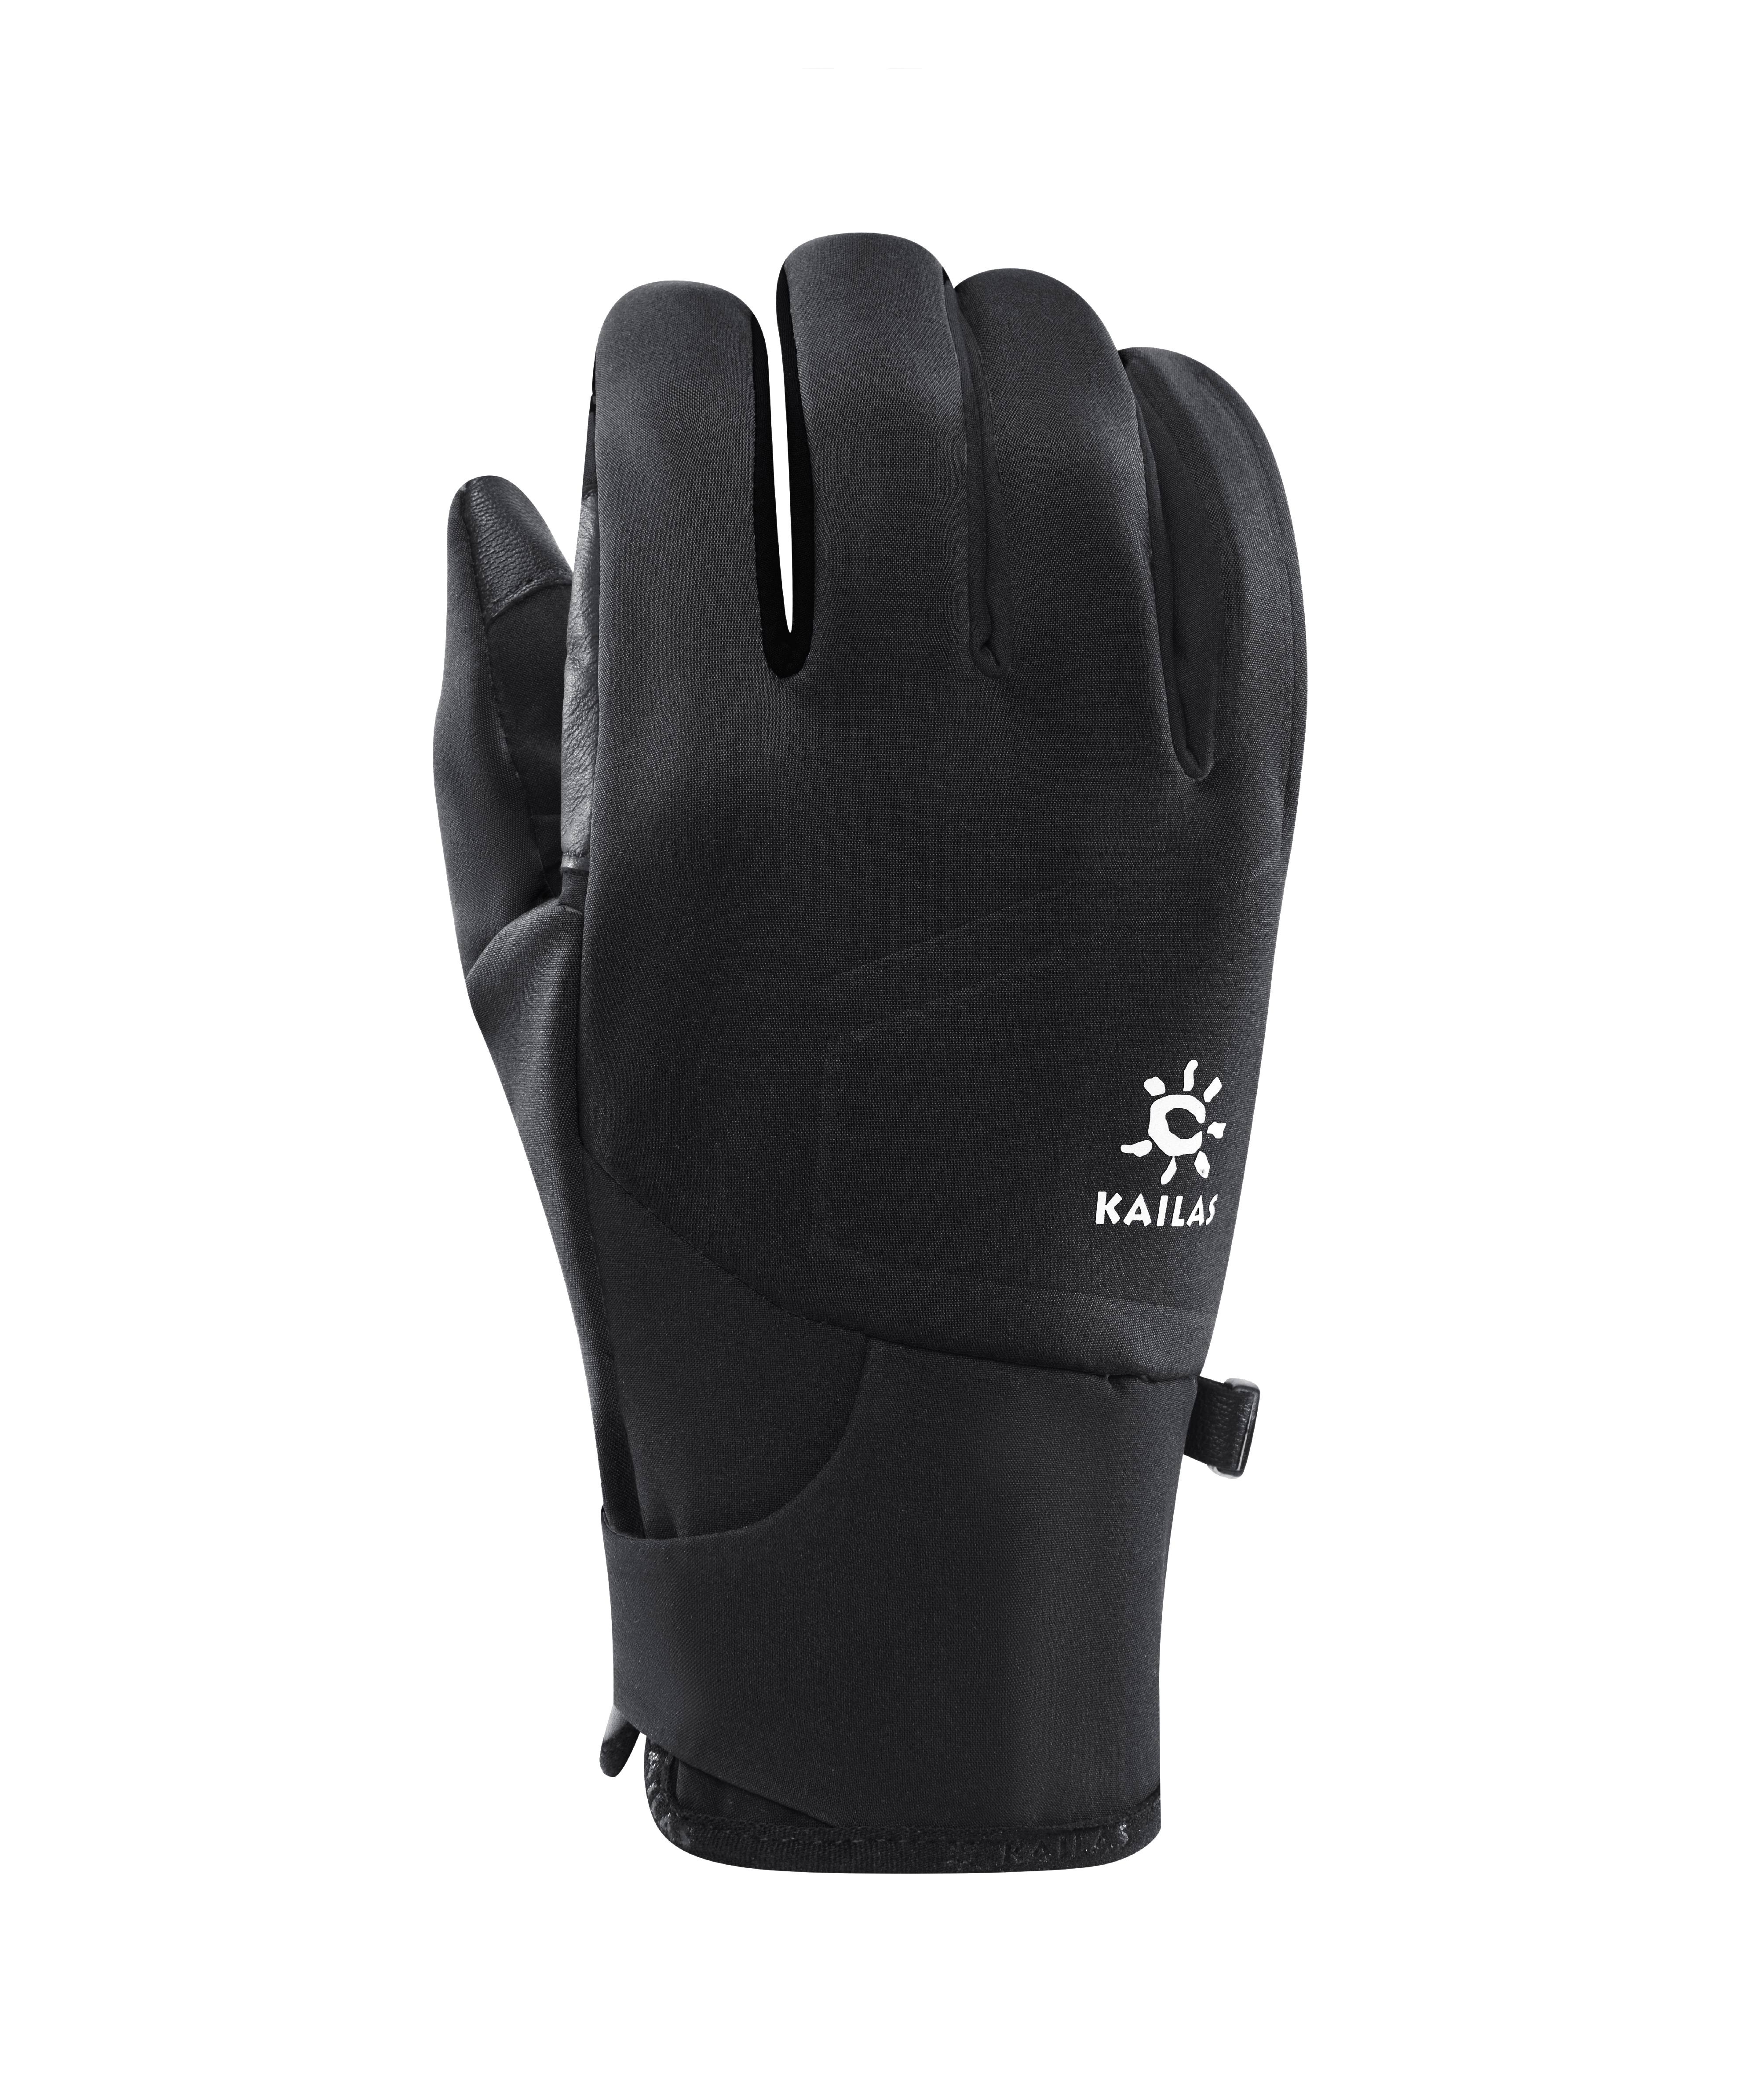 Kailas Wind Master II GORE-TEX Windproof Touchscreen Hiking Gloves Men